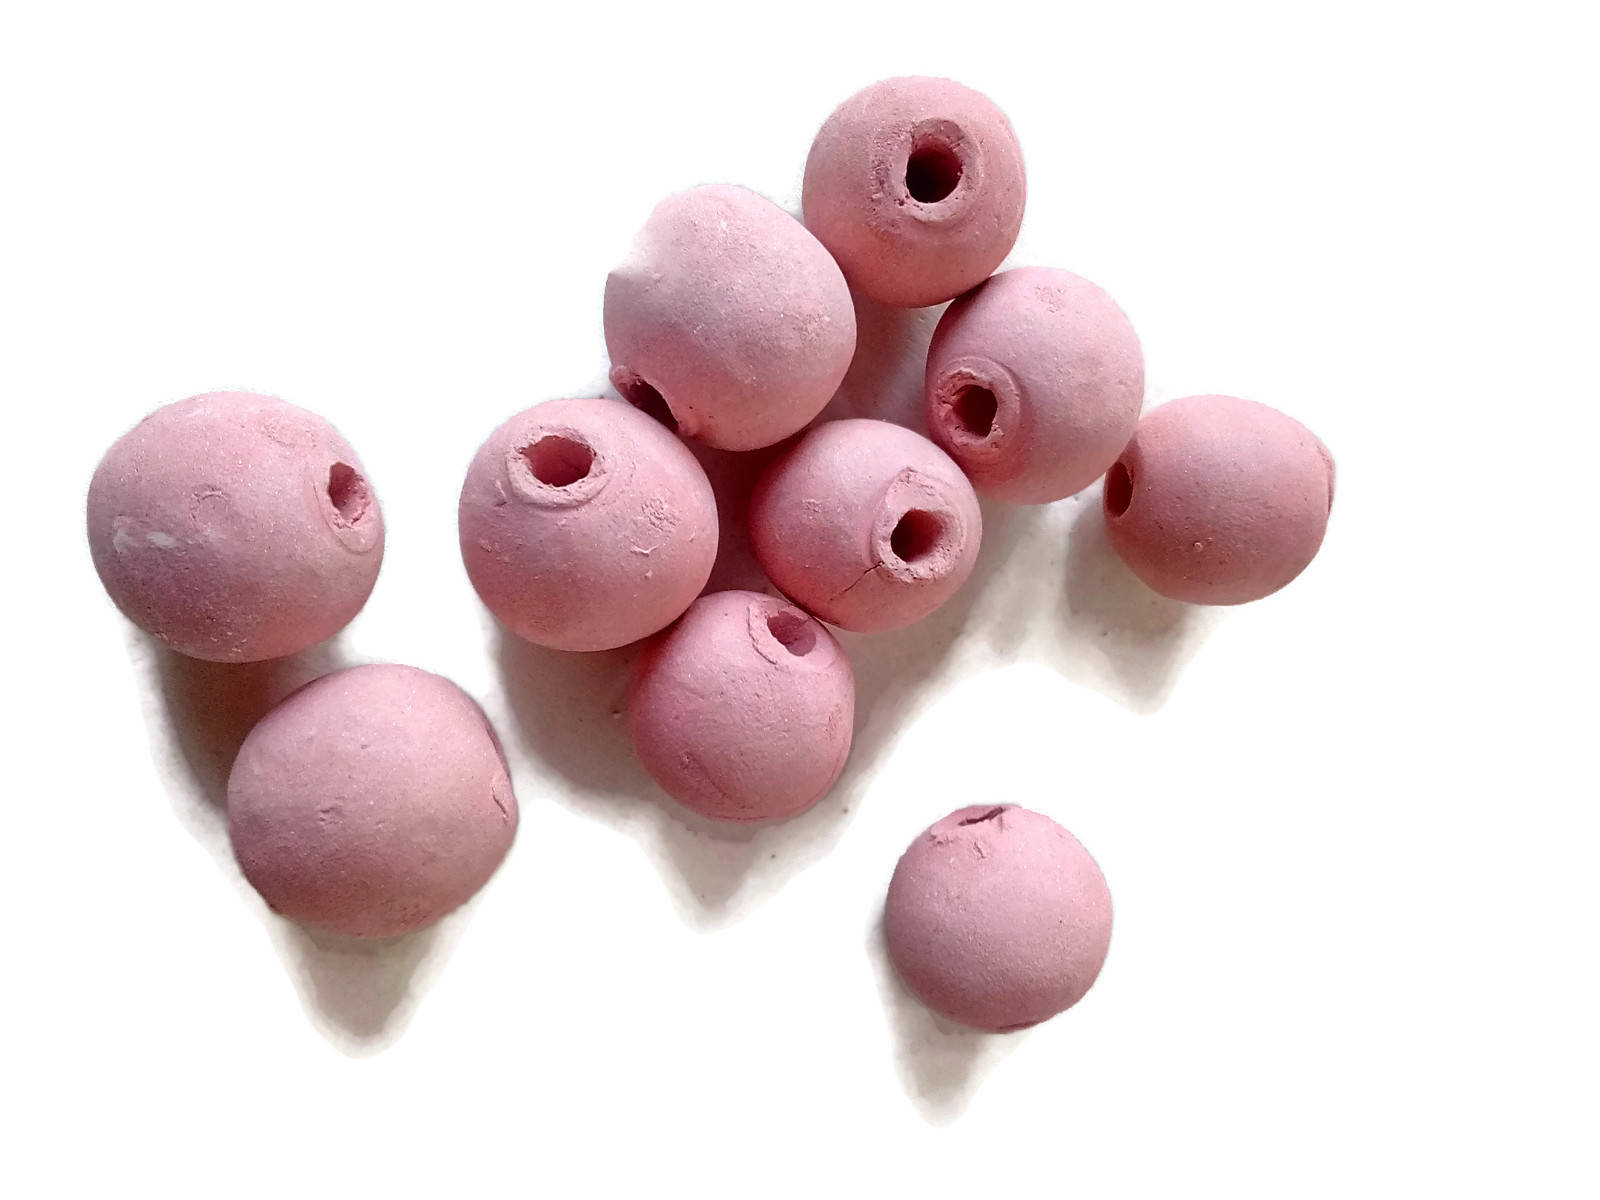 Clay Beads For Jewelry Making, Set Of 10 Handmade Macrame Beads Ceramic Trending Now, Best Sellers Round Bubblegum Beads Unique Porcelain - Ceramica Ana Rafael